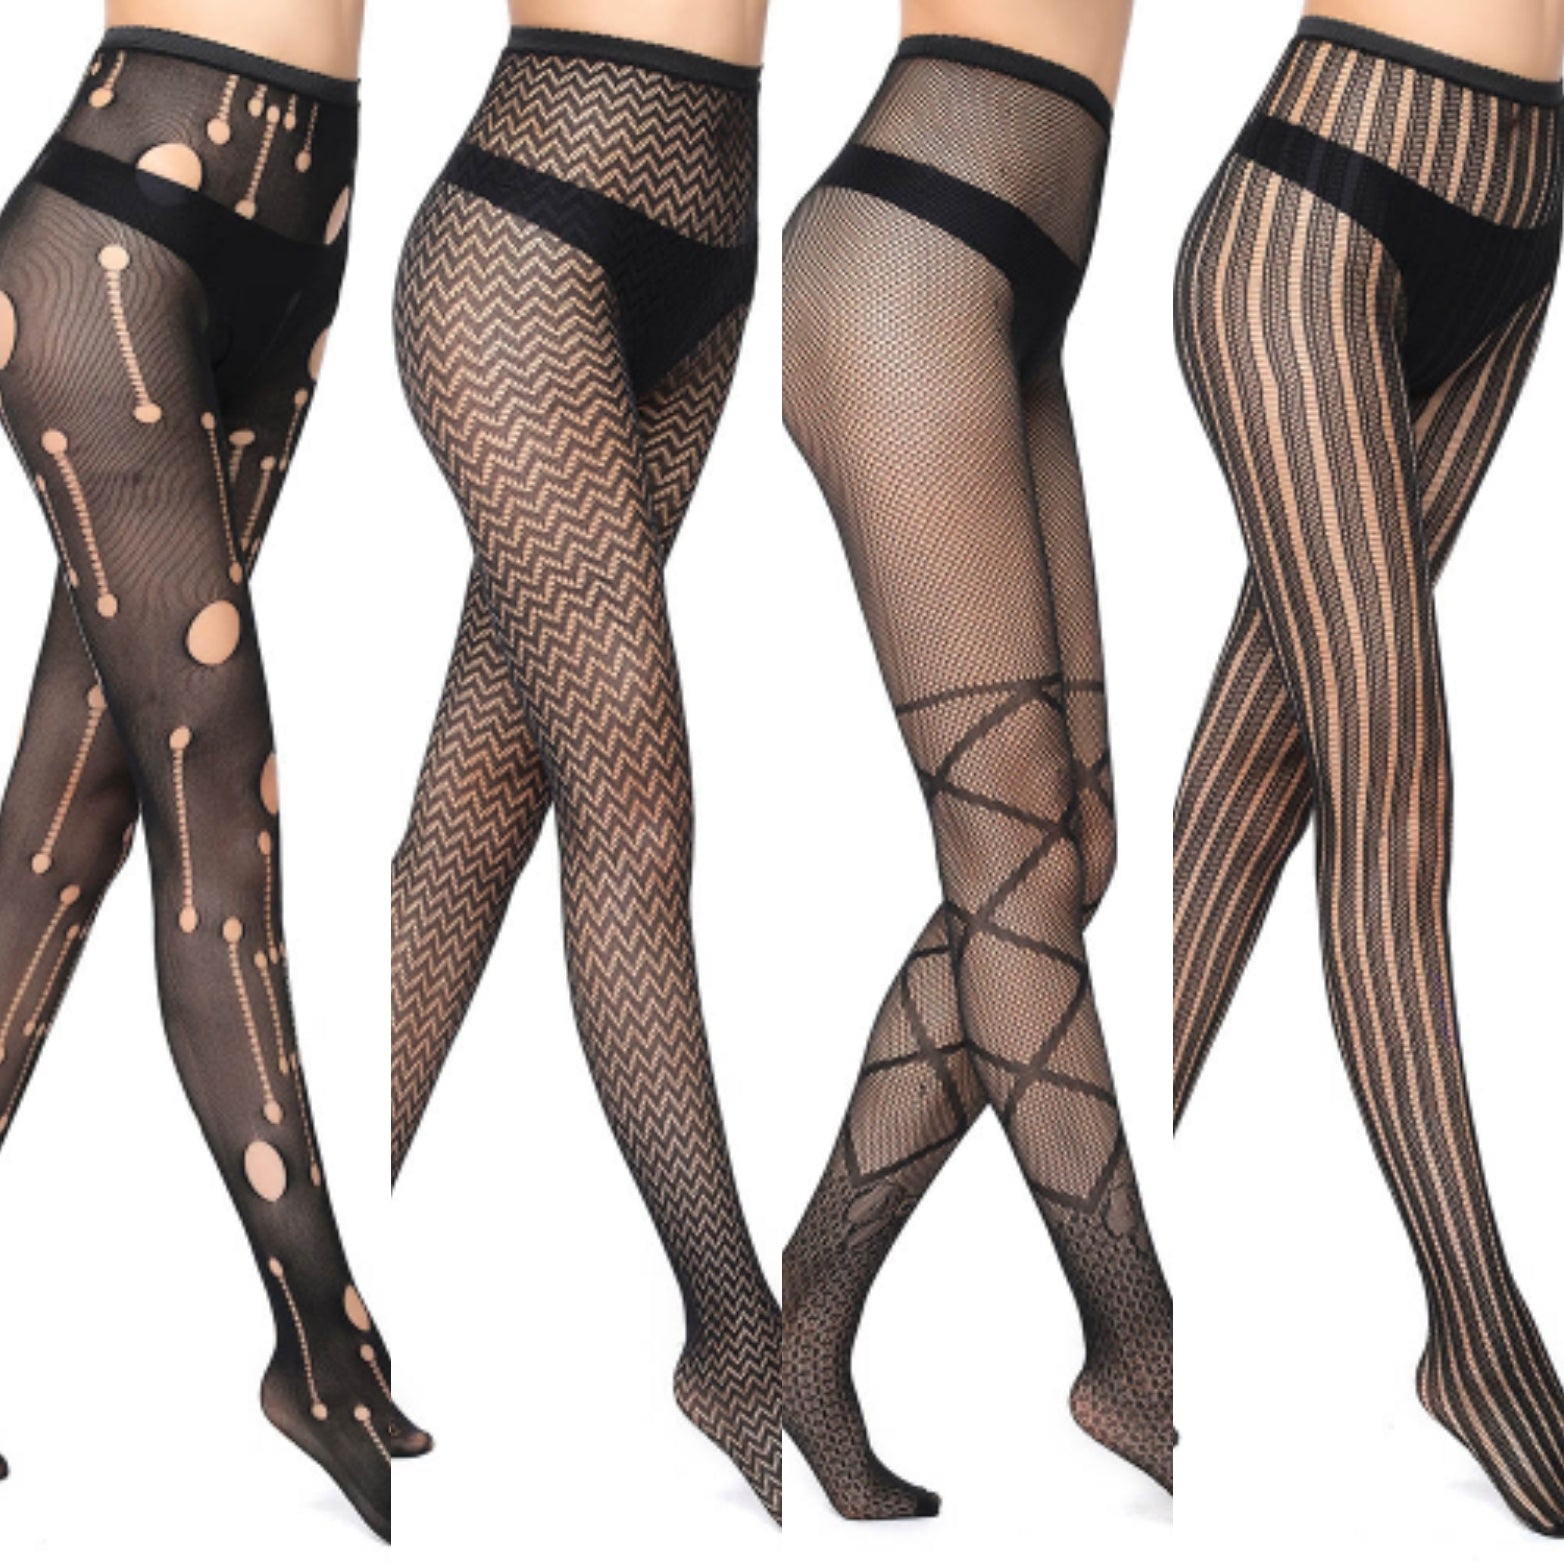 Geometric - Tights and stockings - Women